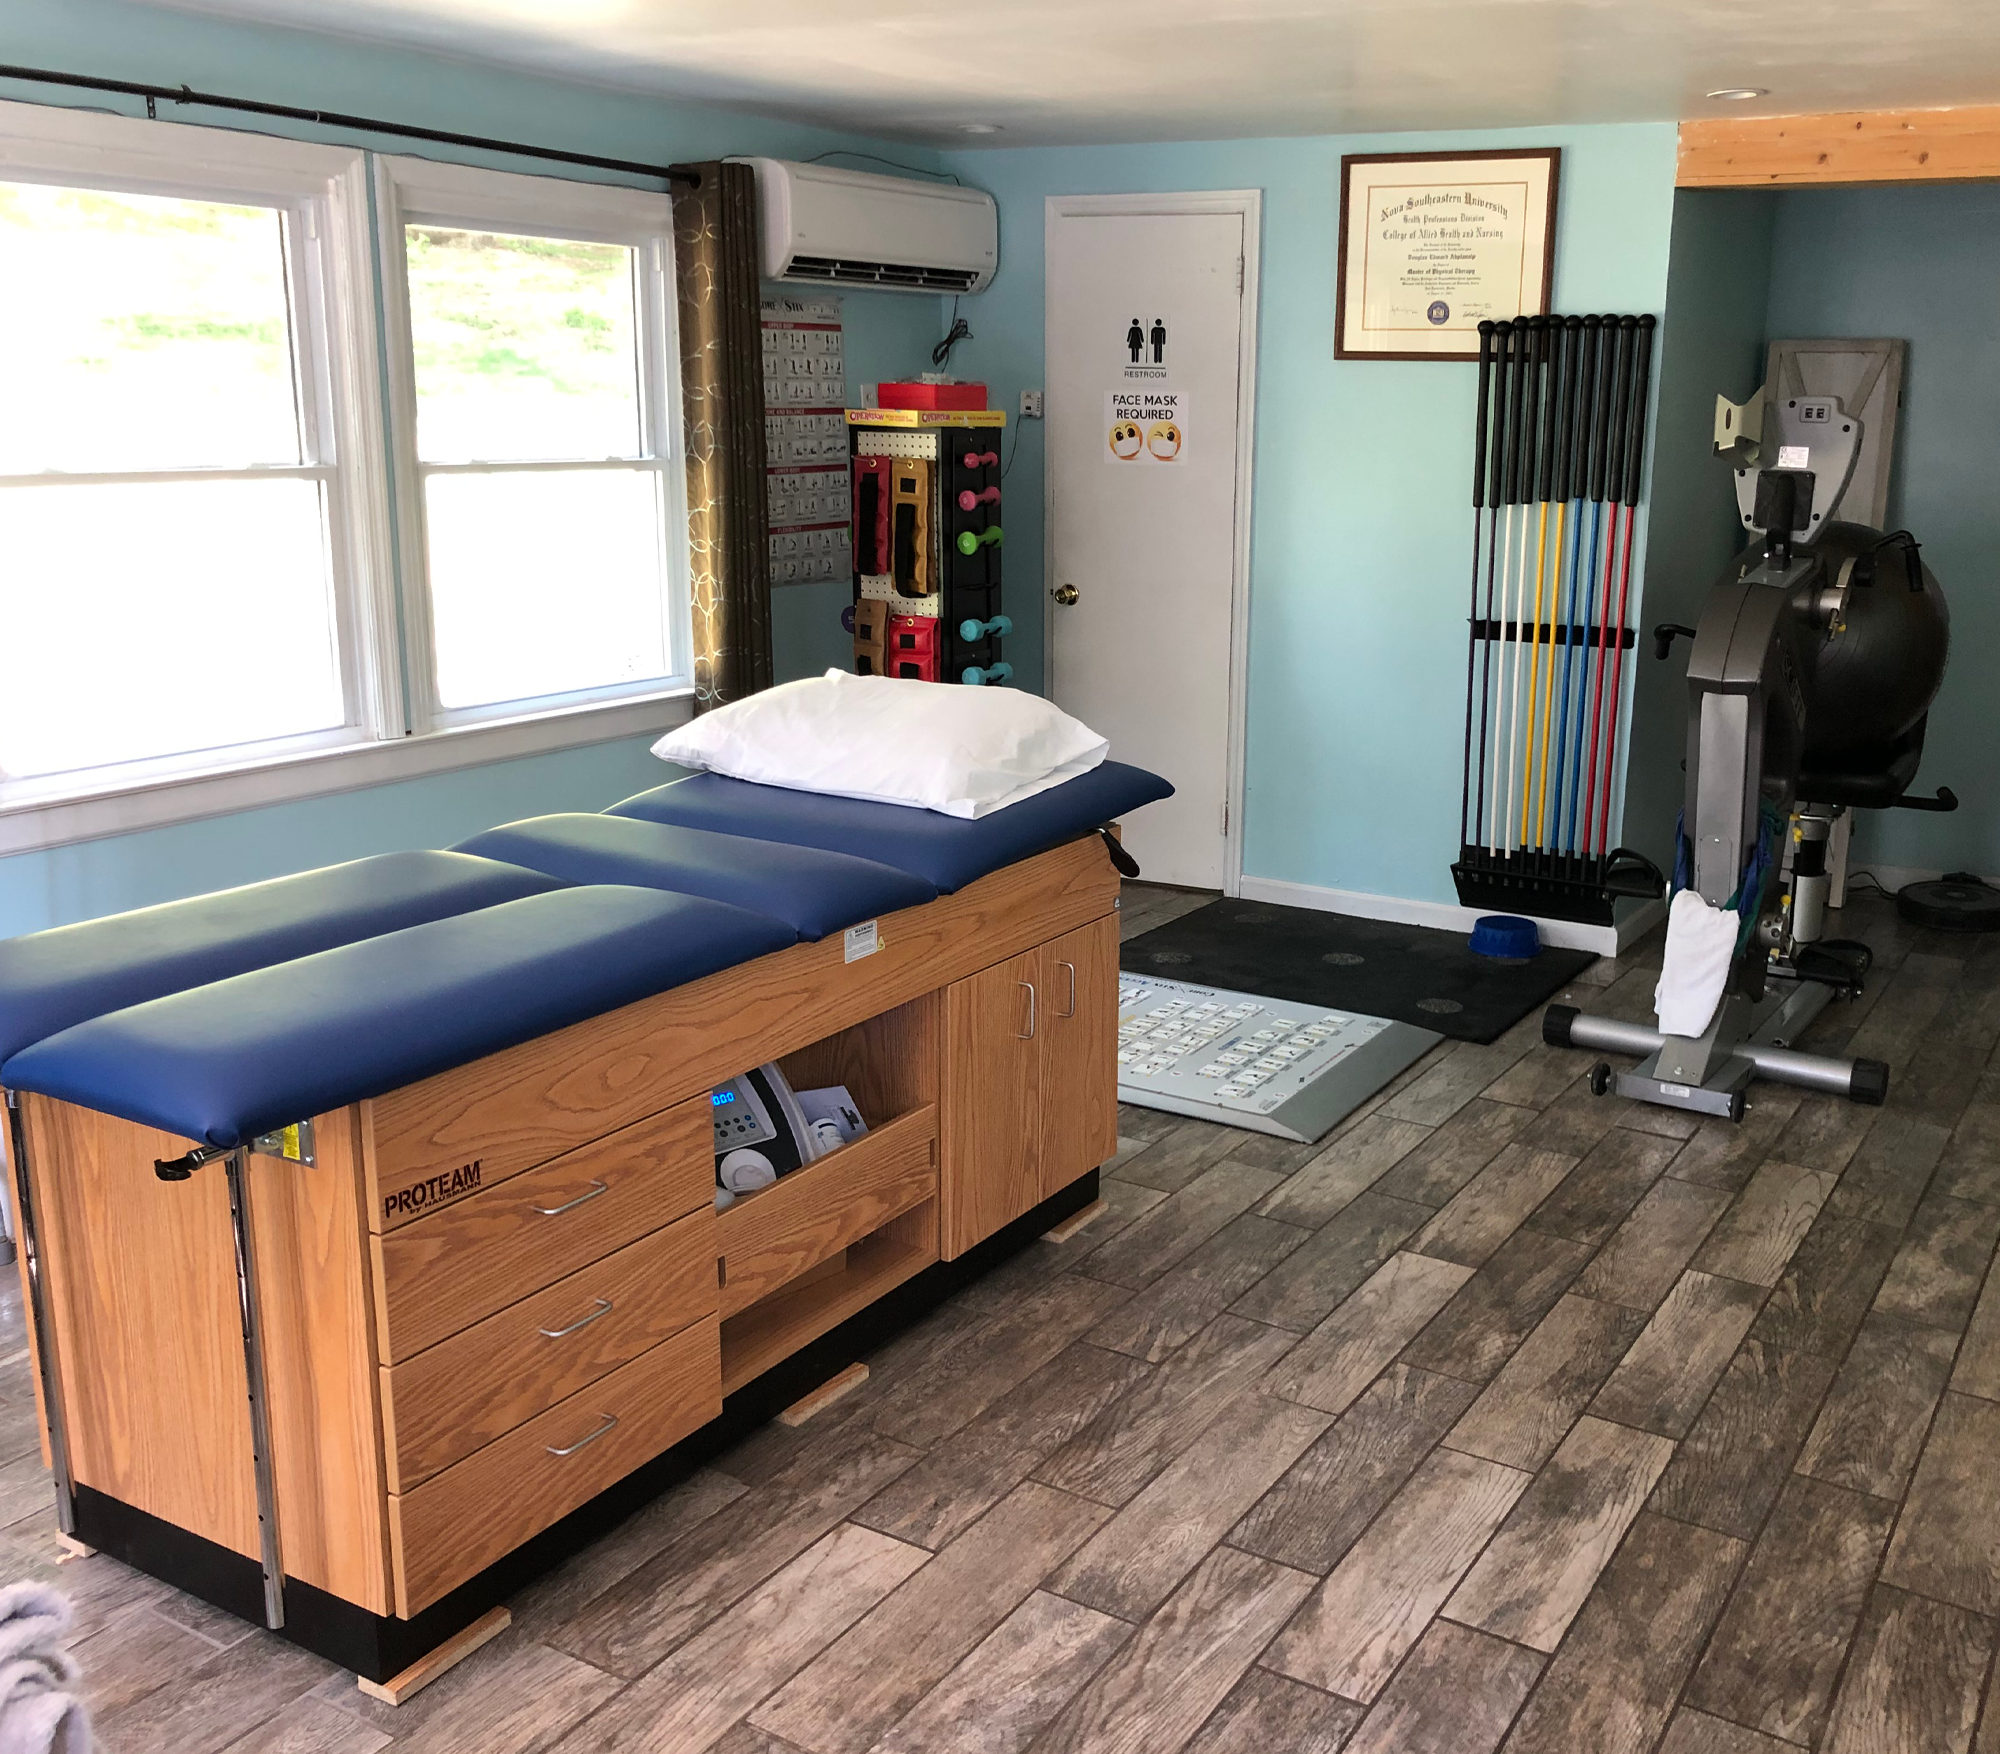 The physical therapy studio showing an bike and equipment